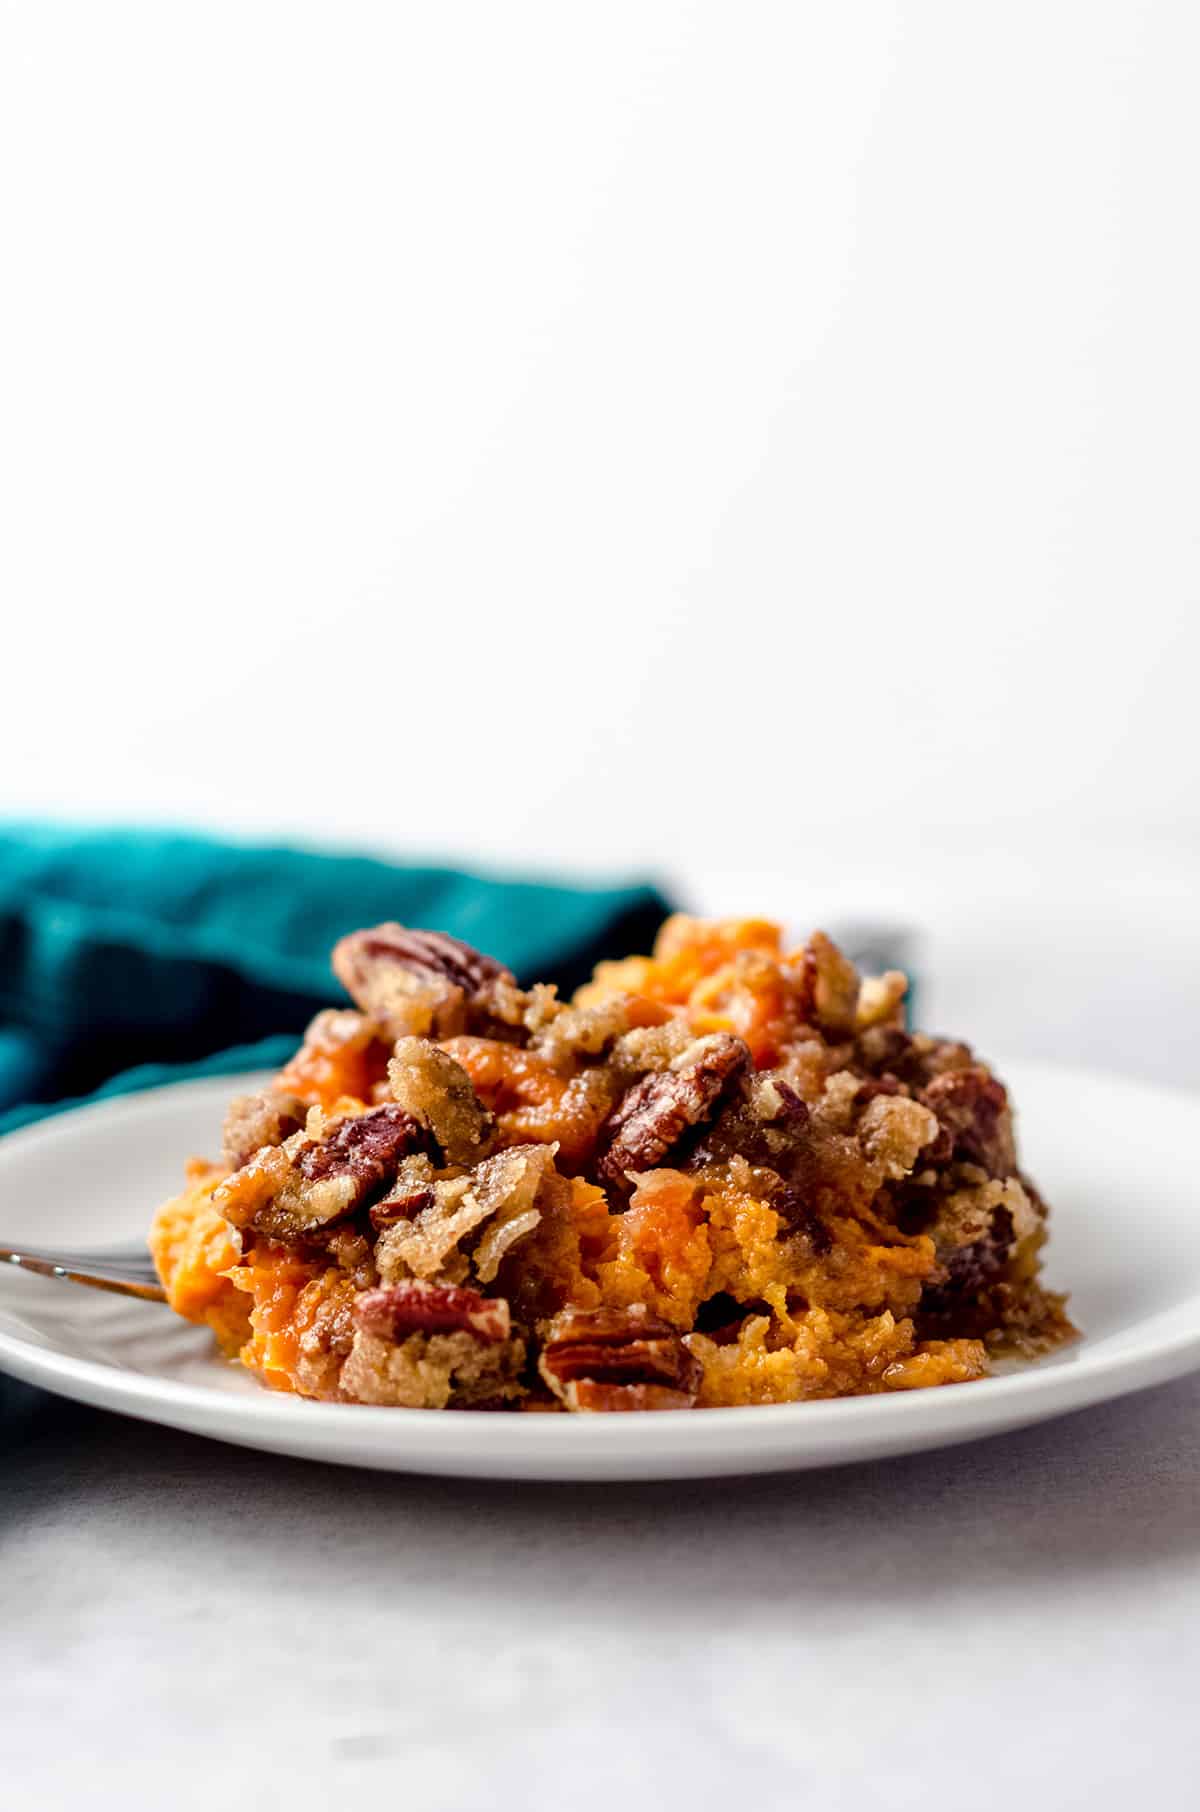 A plate of a sweet potato casserole with a crunchy topping.